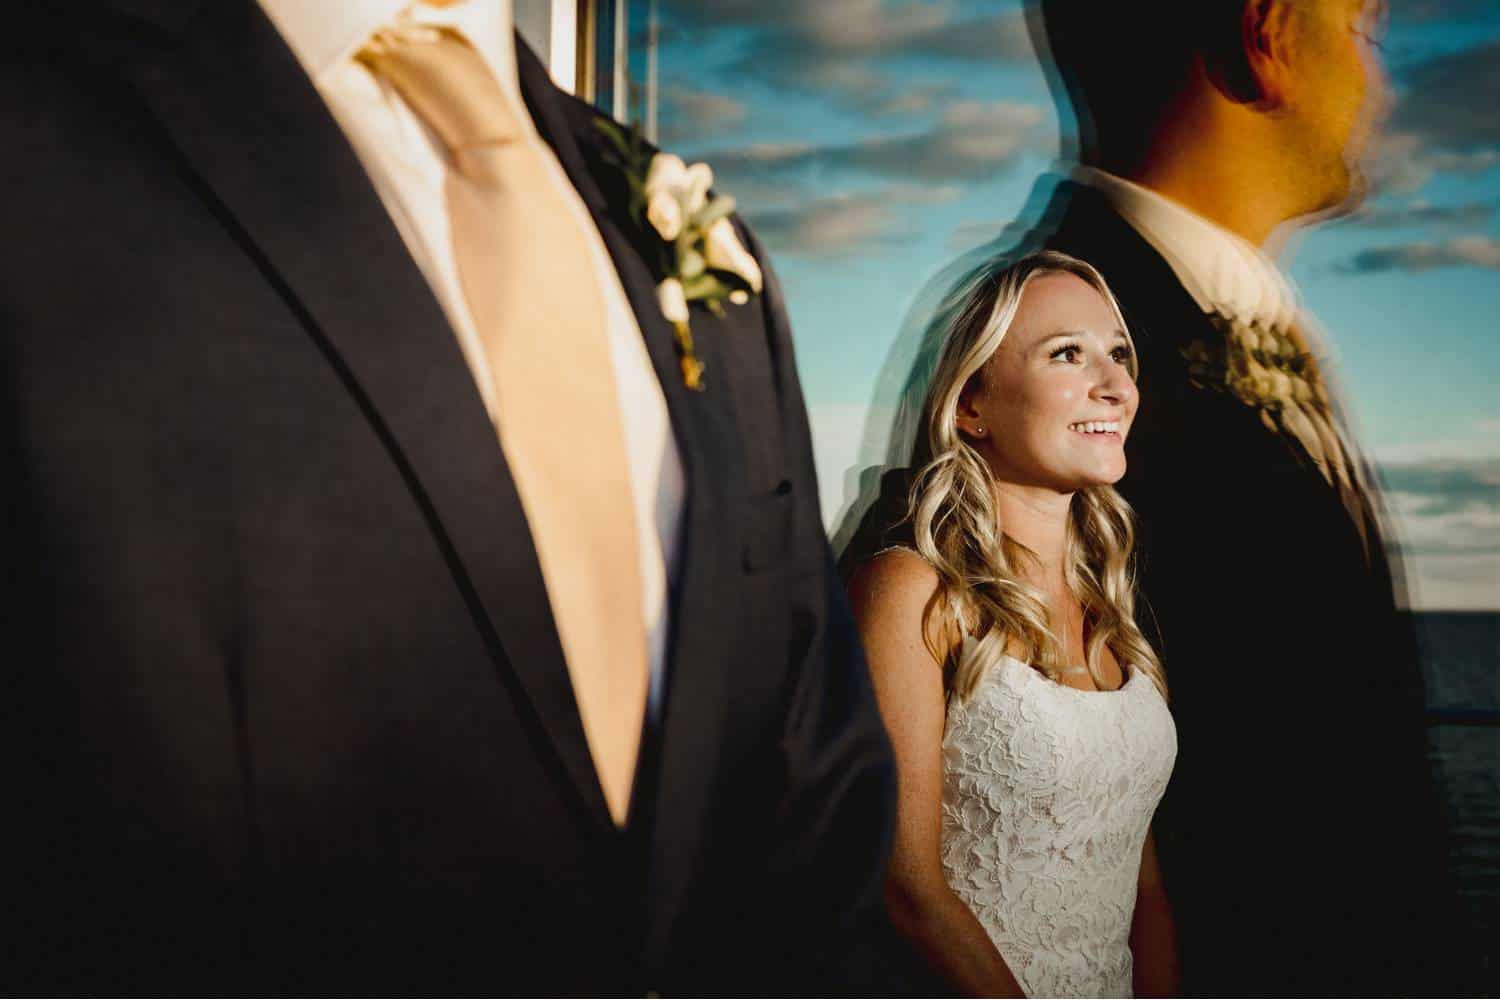 A bride stands indoors facing a flash with a smile on her face. The groom stands closer to the camera, on the outdoor side of the window through which you can see the bride. His form and the blue sky are both reflected off the glass, surrounding the bride. Black & Gold Photography creates wedding portraits using off-camera flash.